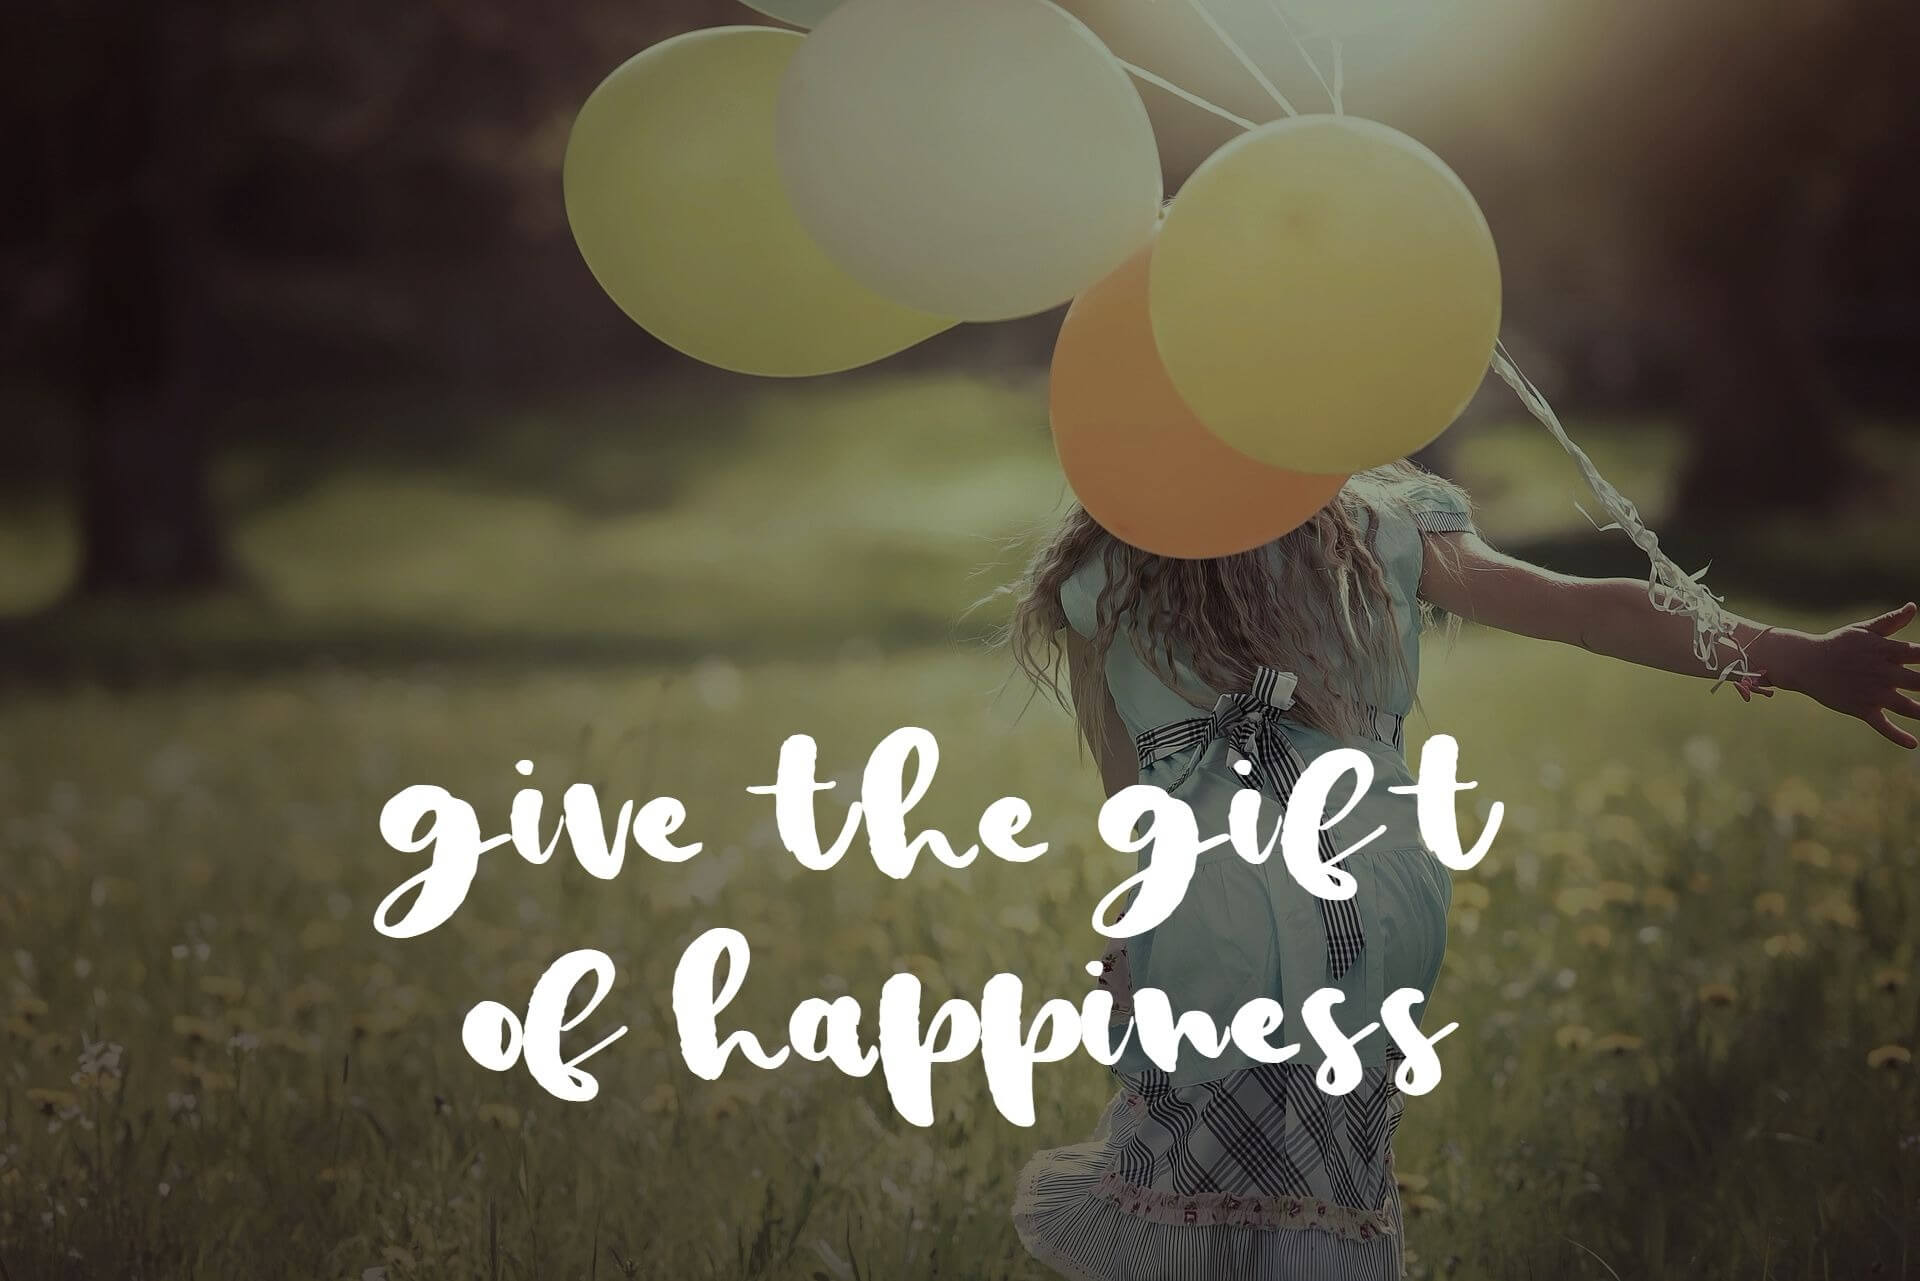 Give the gift of happiness